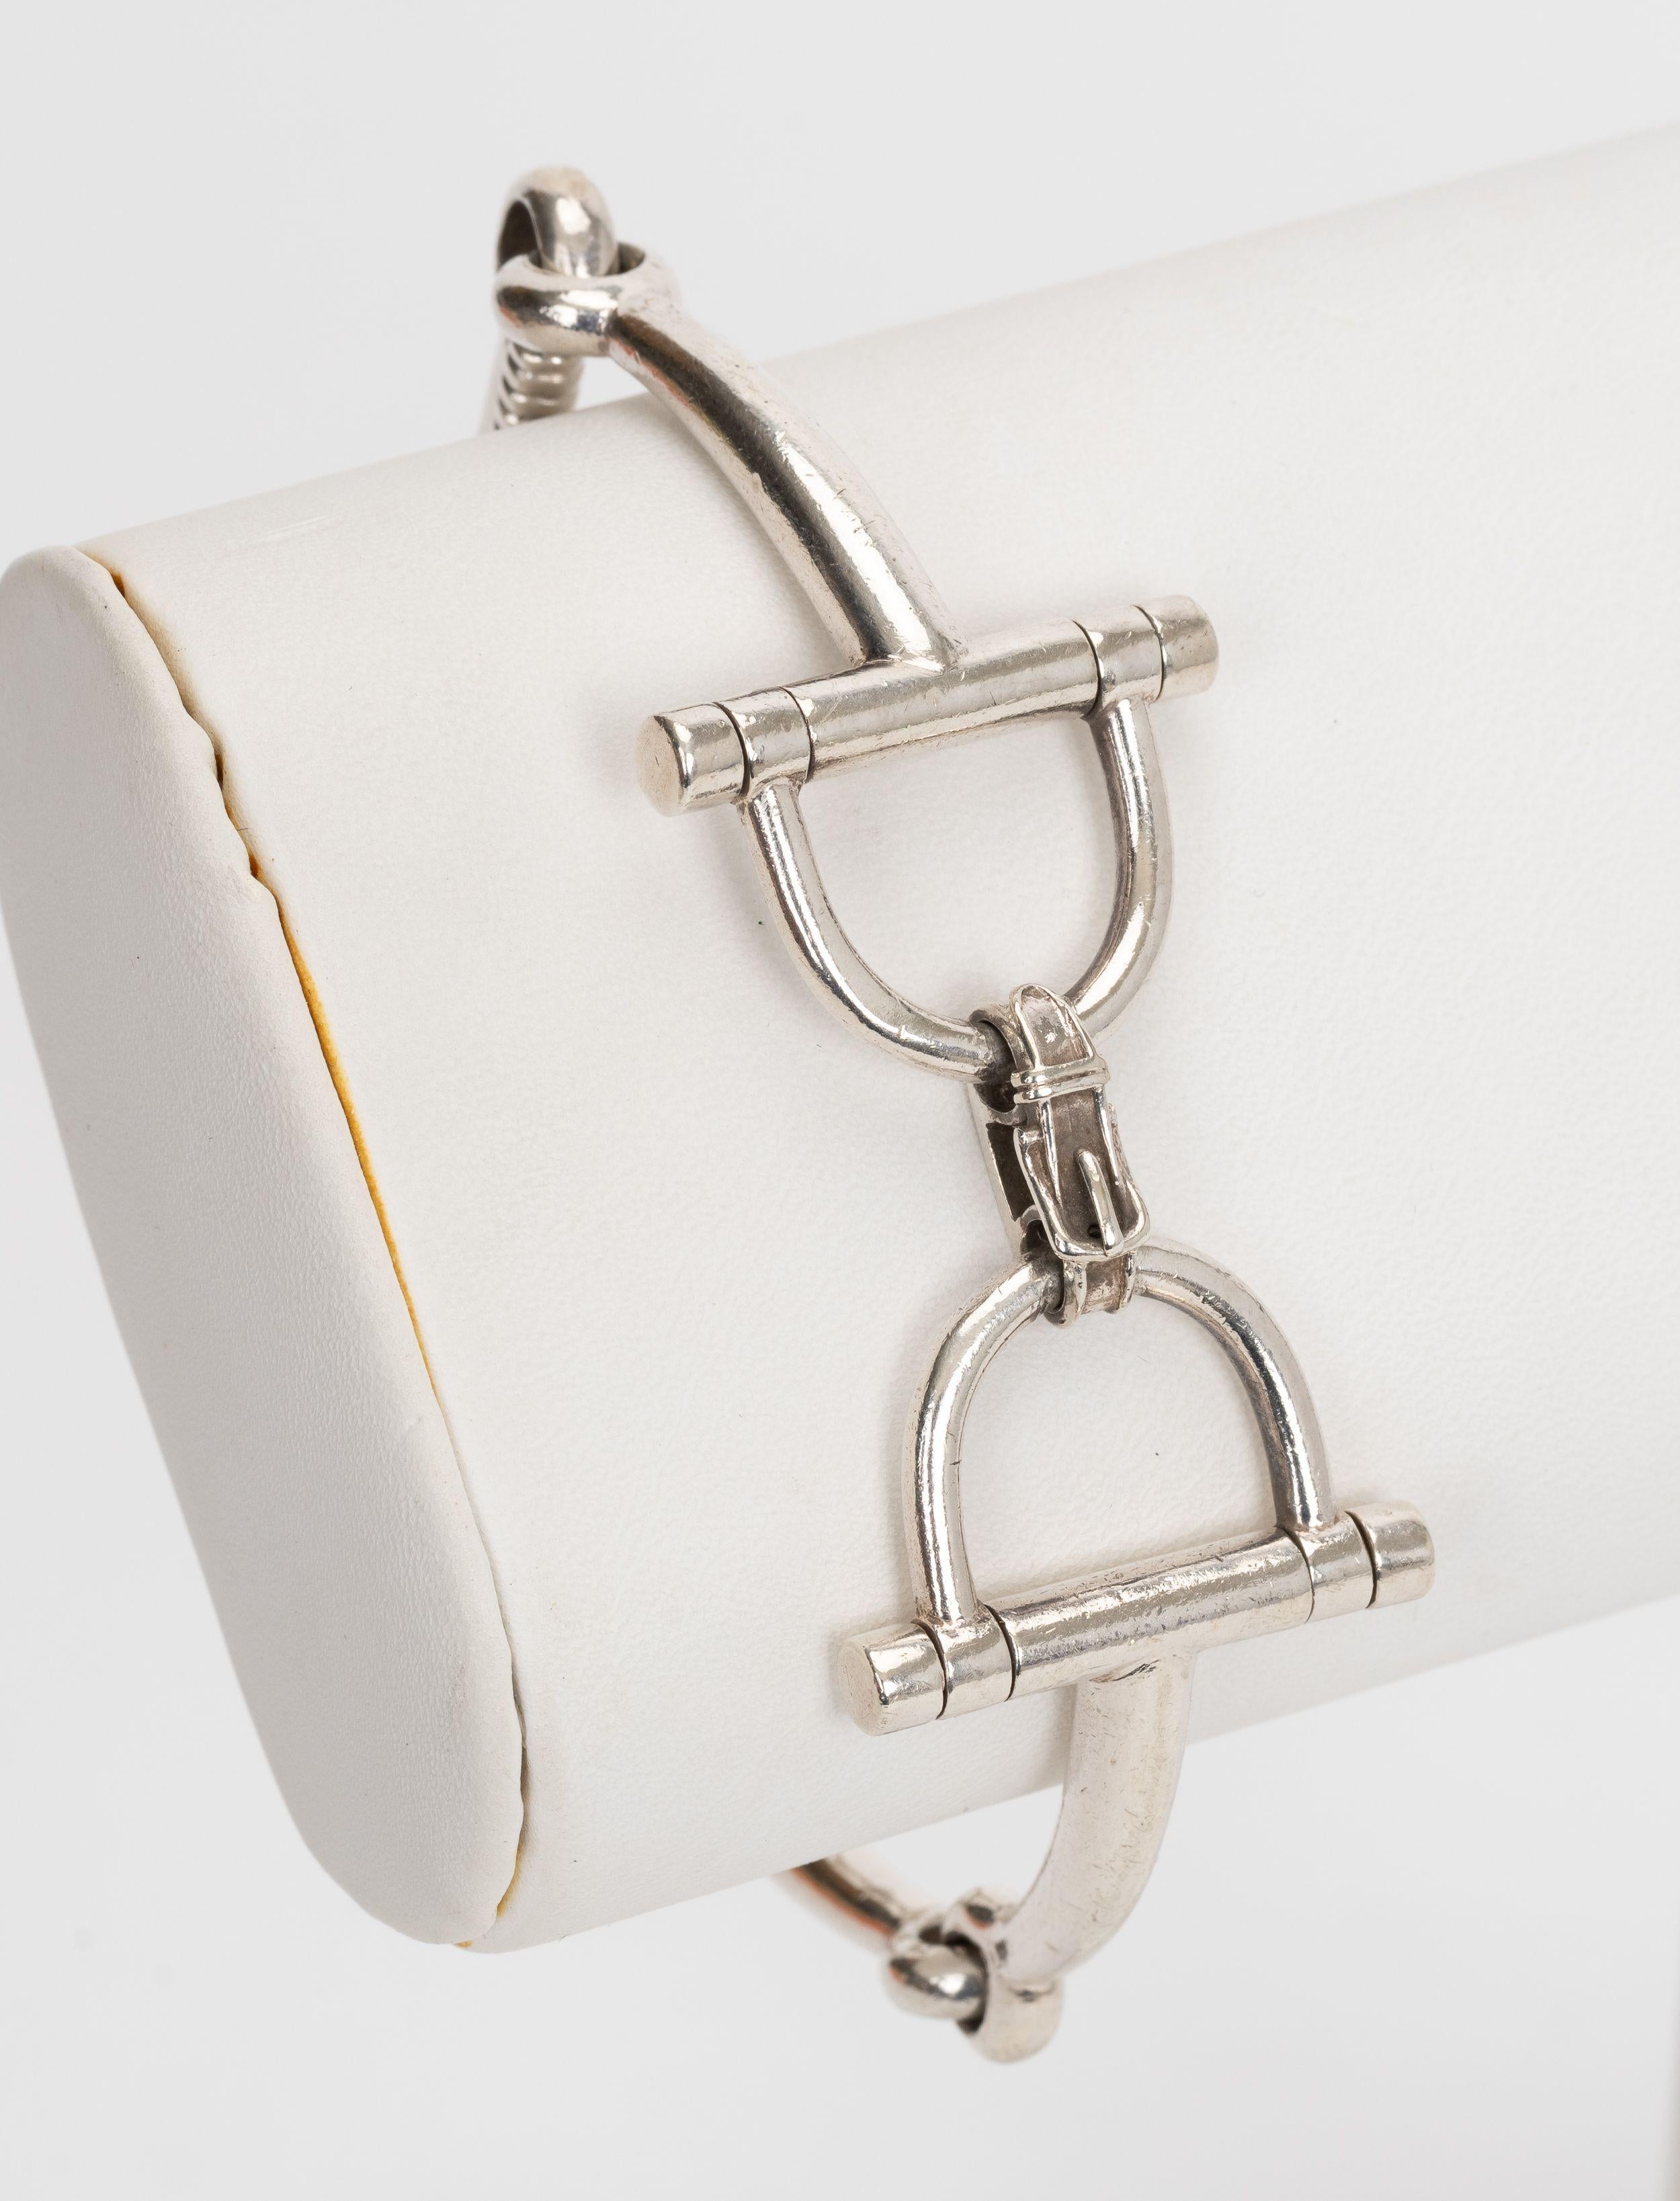 Hermès Horse Bit Bracelet in Sterling Silver features alternating horse bits and buckle links. Comes with original pouch.